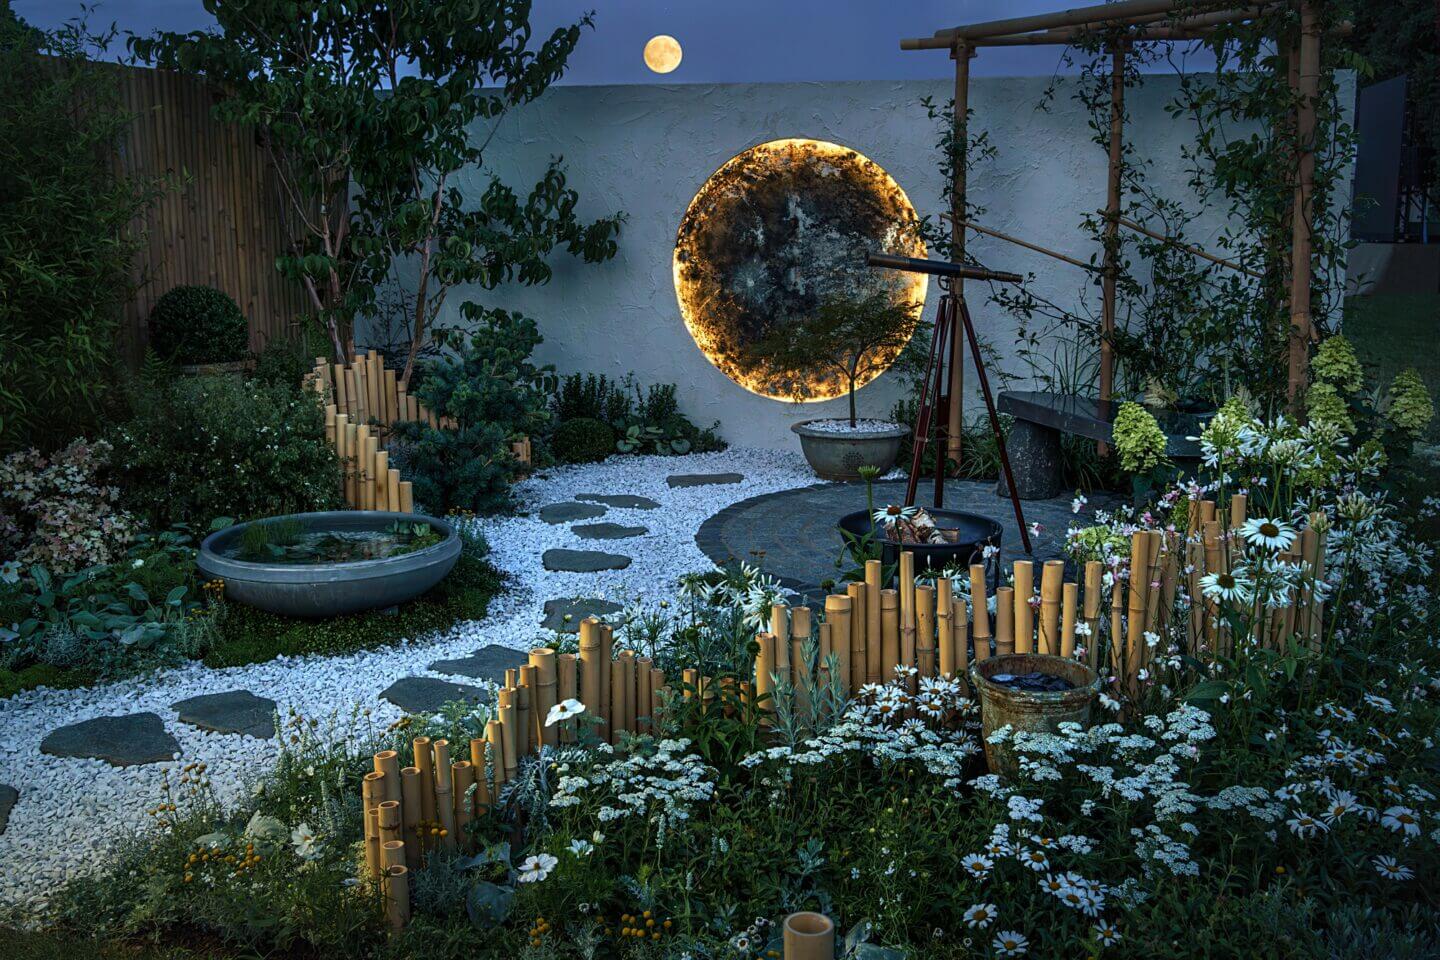 Full moon in July over a lunar themed garden at RHS Hampton Court